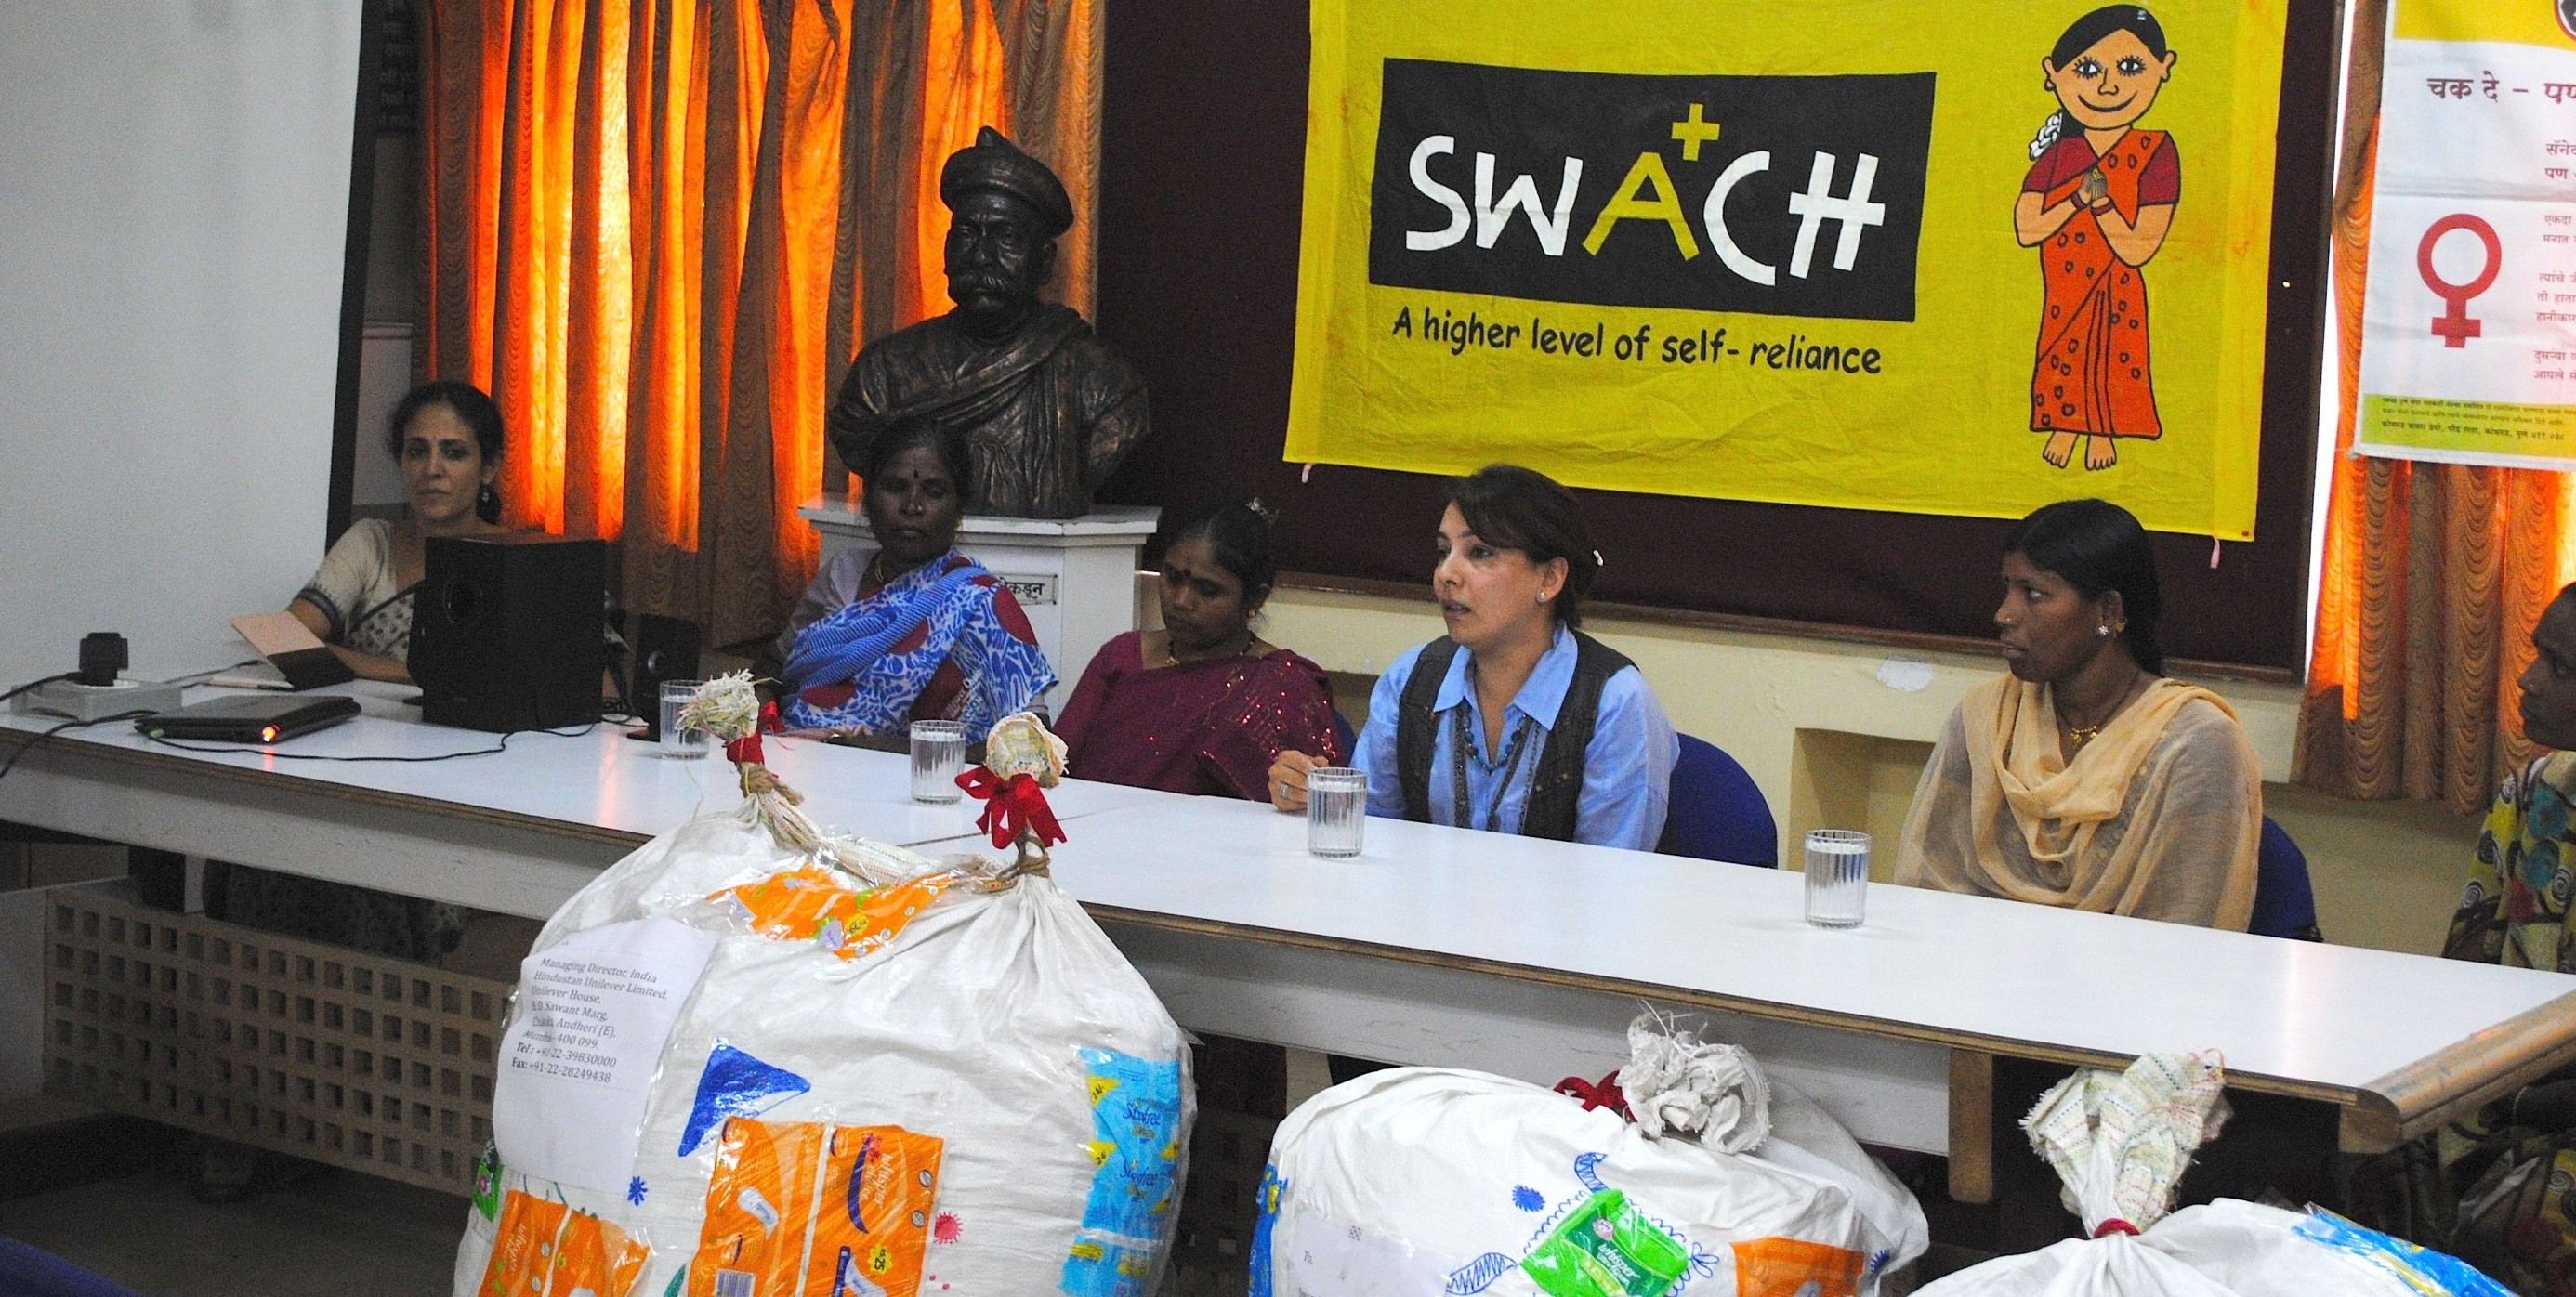 A press conference in March 2013 to address the issue of proper disposal of sanitary napkins. Photo credit: SWaCH.